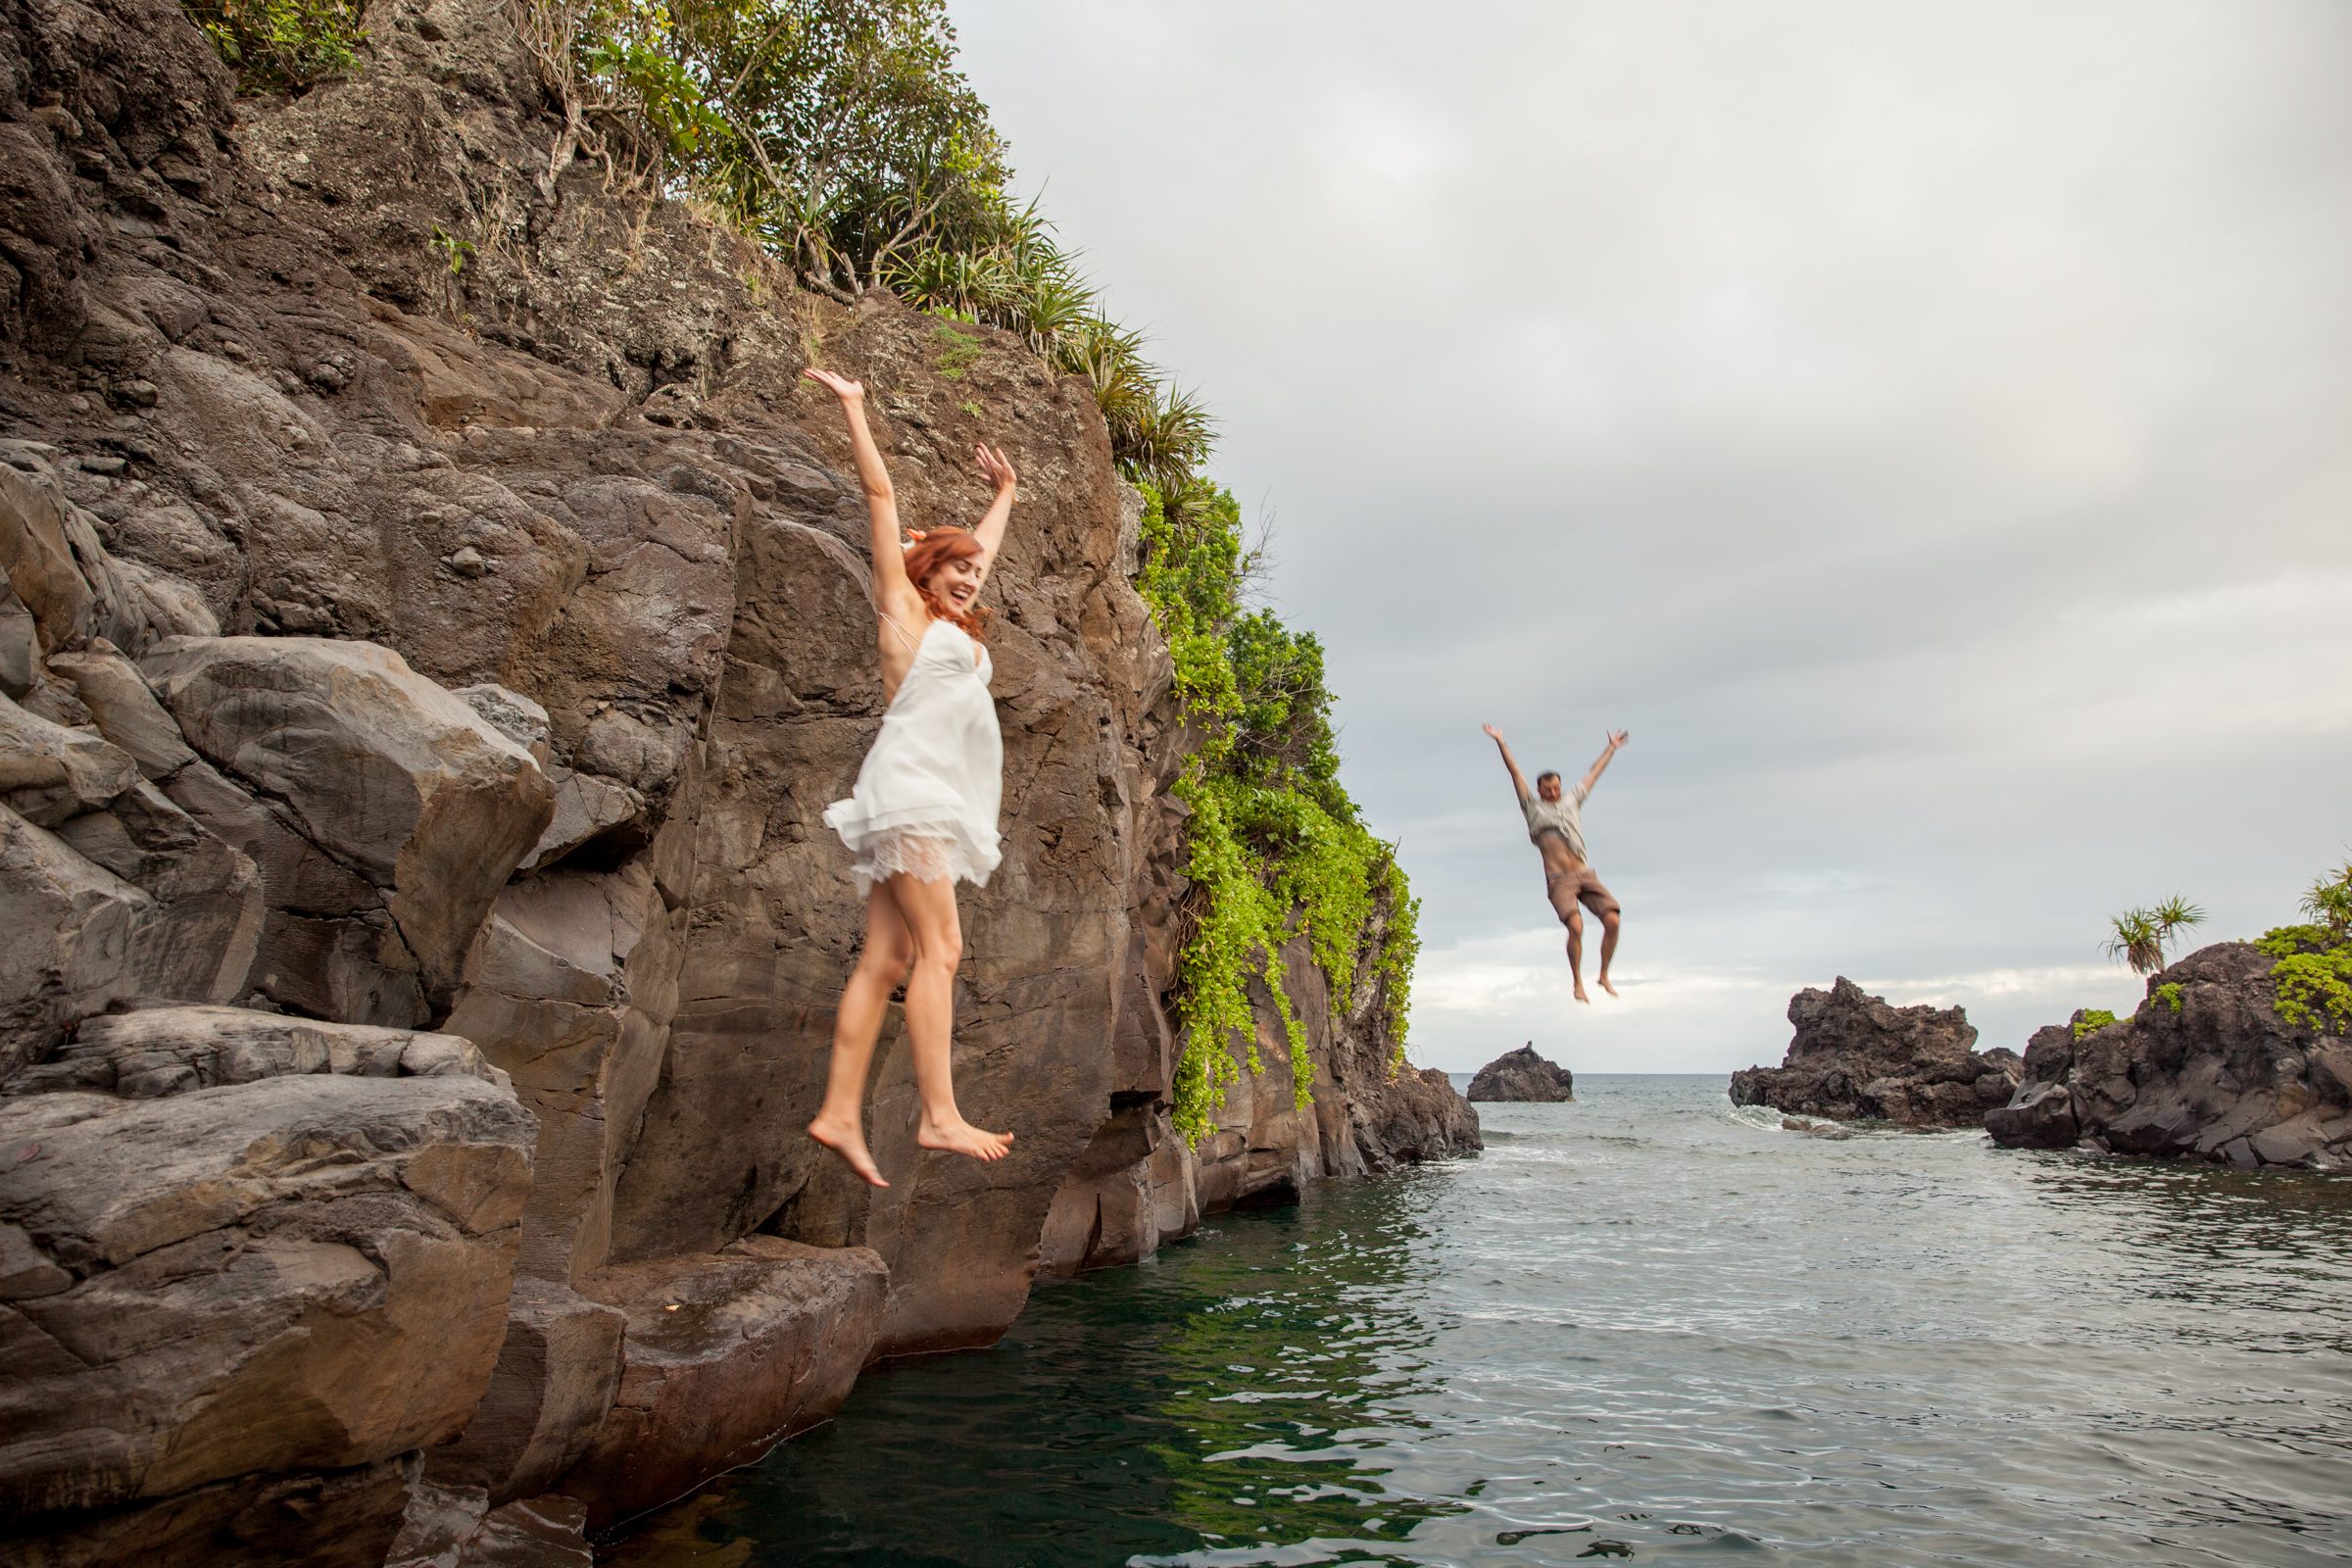 A newly wed couple literally take the plunge a jump simultaneously off a cliff into the ocean.